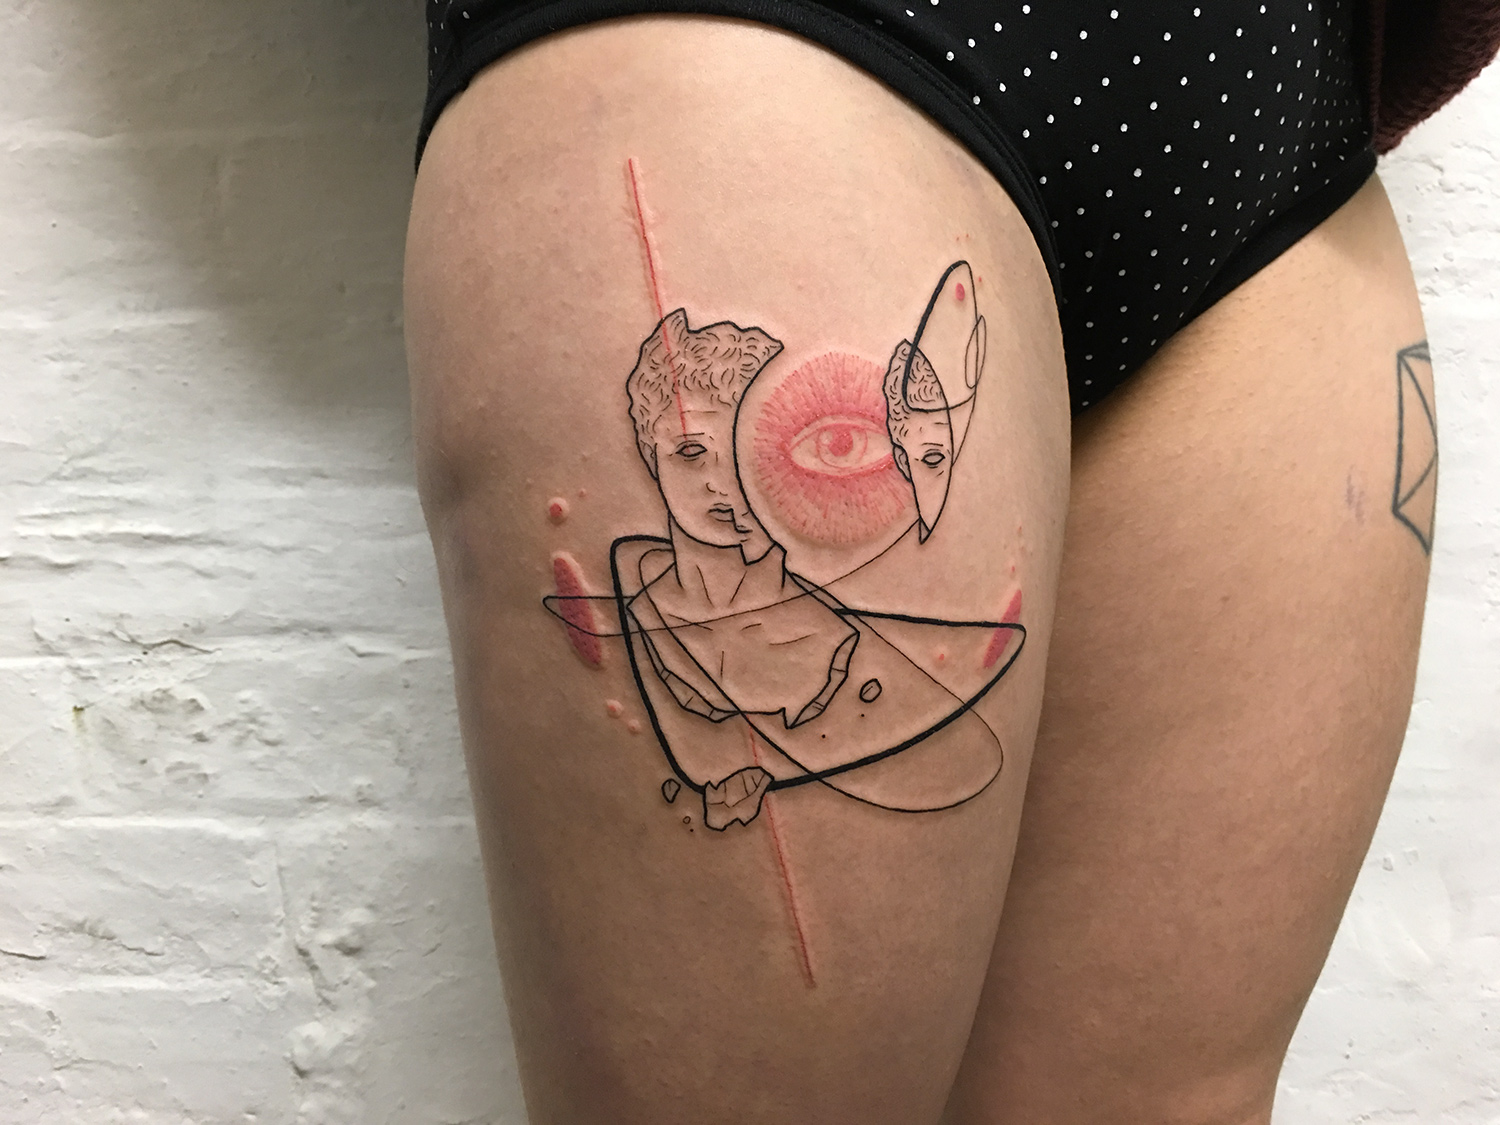 Adam Traves, Disinhibition - abstract classical sculpture tattoo